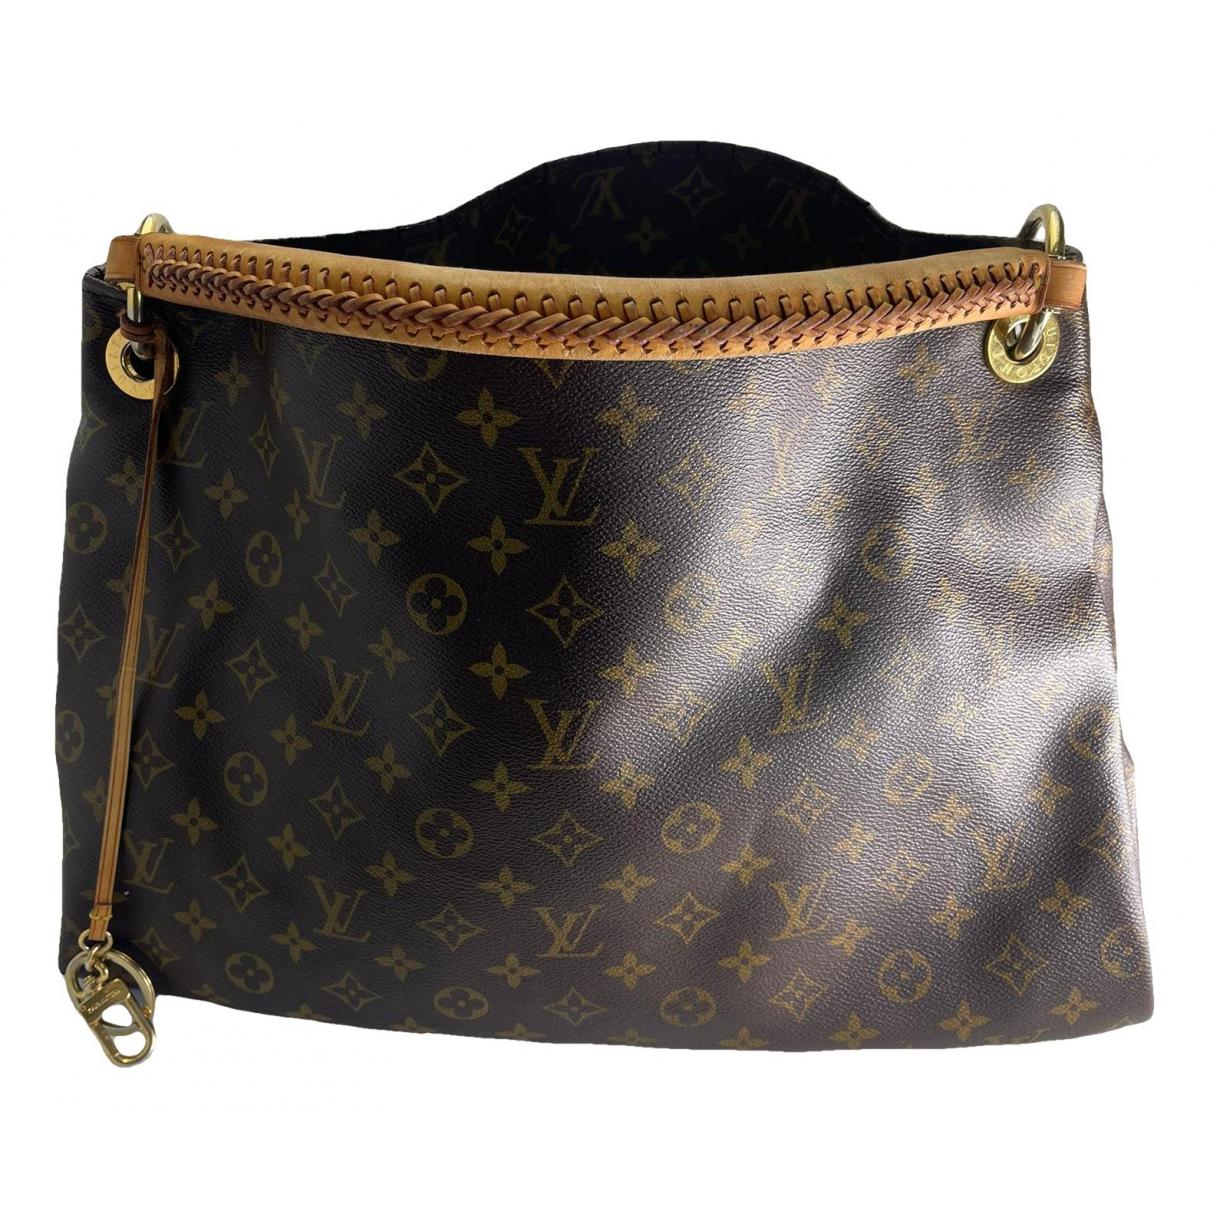 Louis Vuitton Artsy Blue - 6 For Sale on 1stDibs